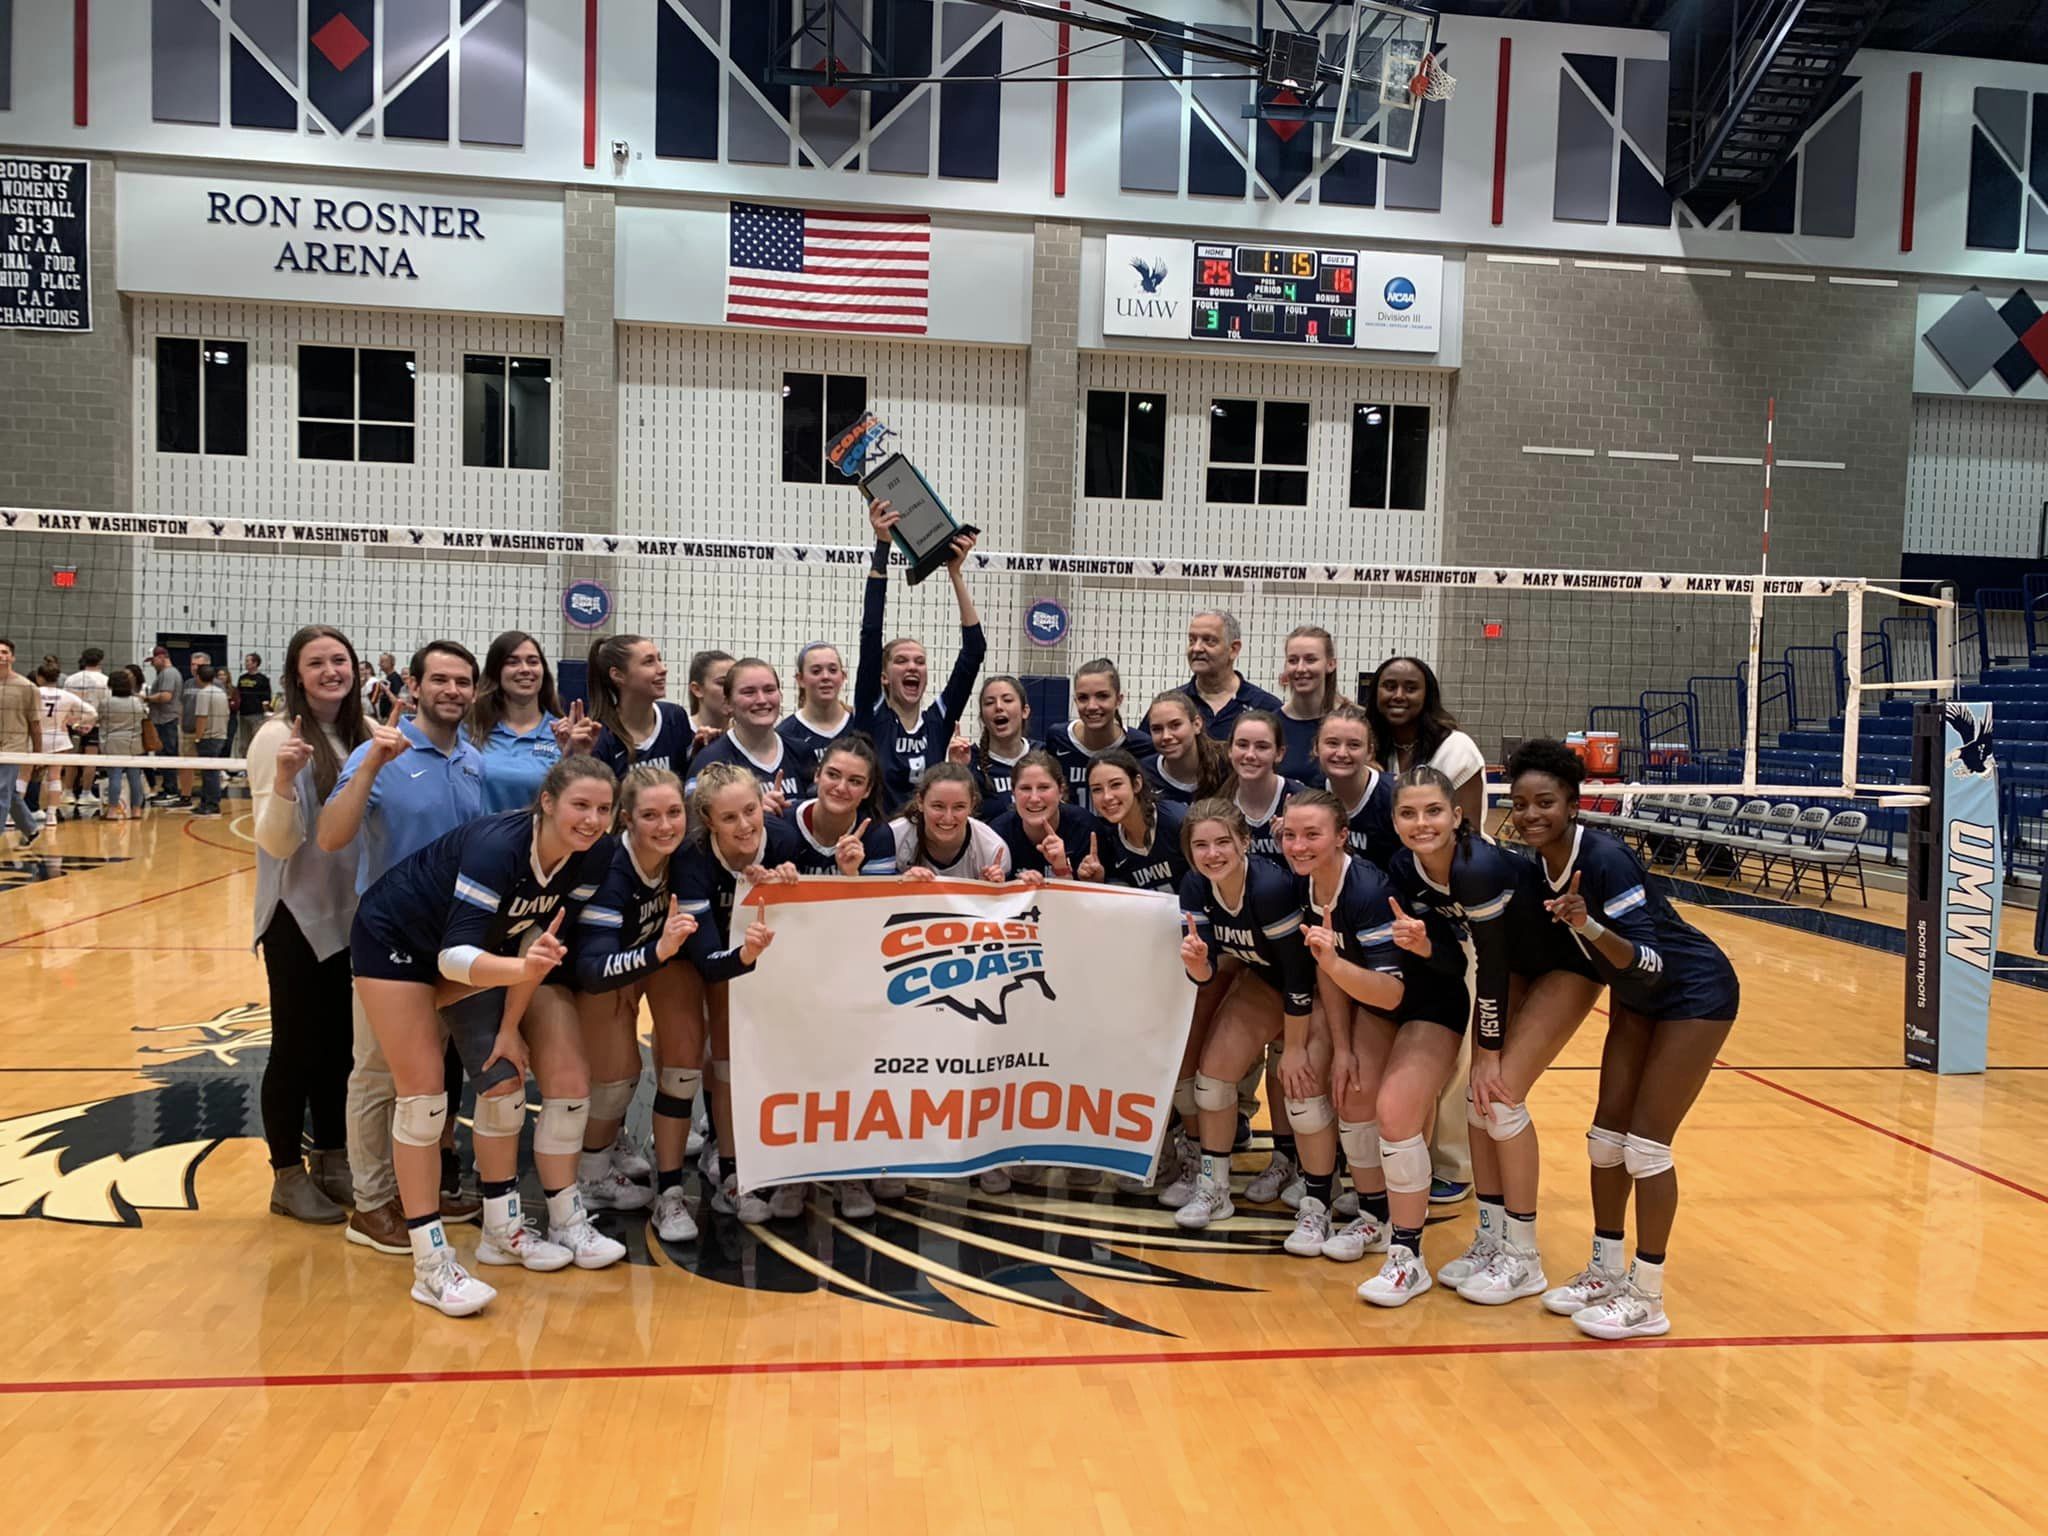 University Of Mary Washington Wins Second Match In NCAA Division III Volleyball Tournament To Move On To Sweet 16 Match Tomorrow (Saturday, November 12th) That Match And Whole Tournament Livestream Broadcast for